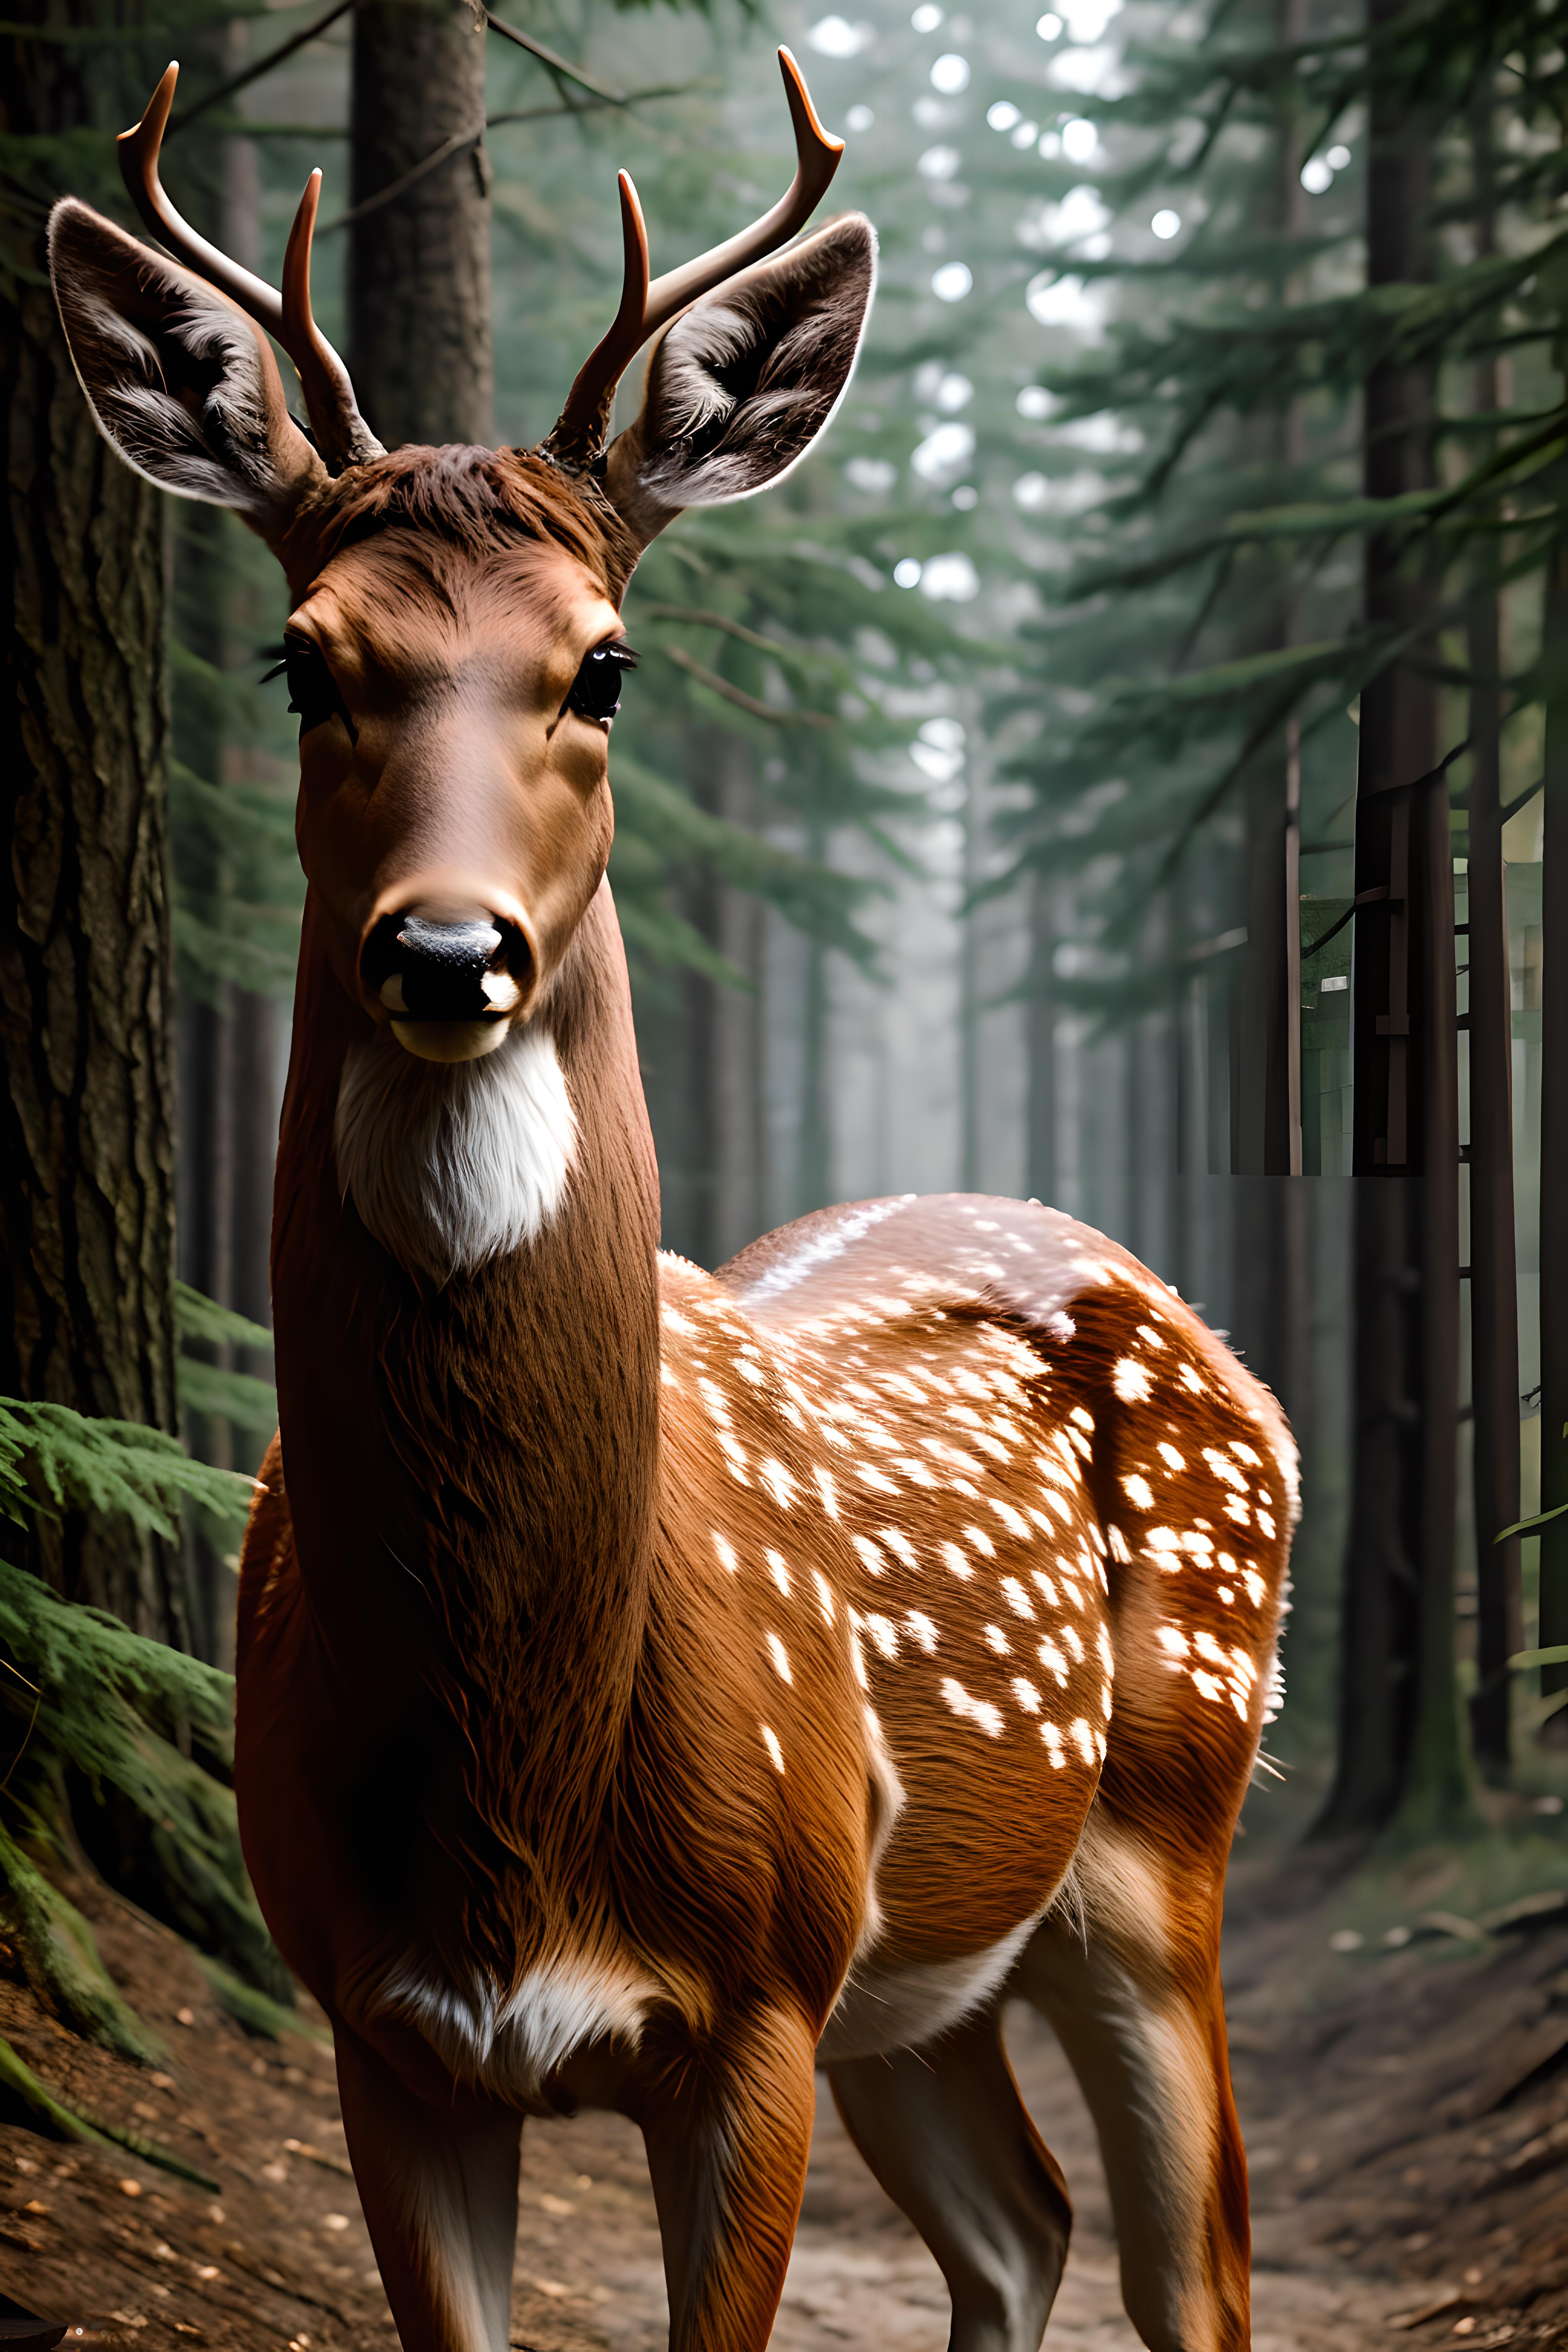 A deer standing in a forest with trees in the background.